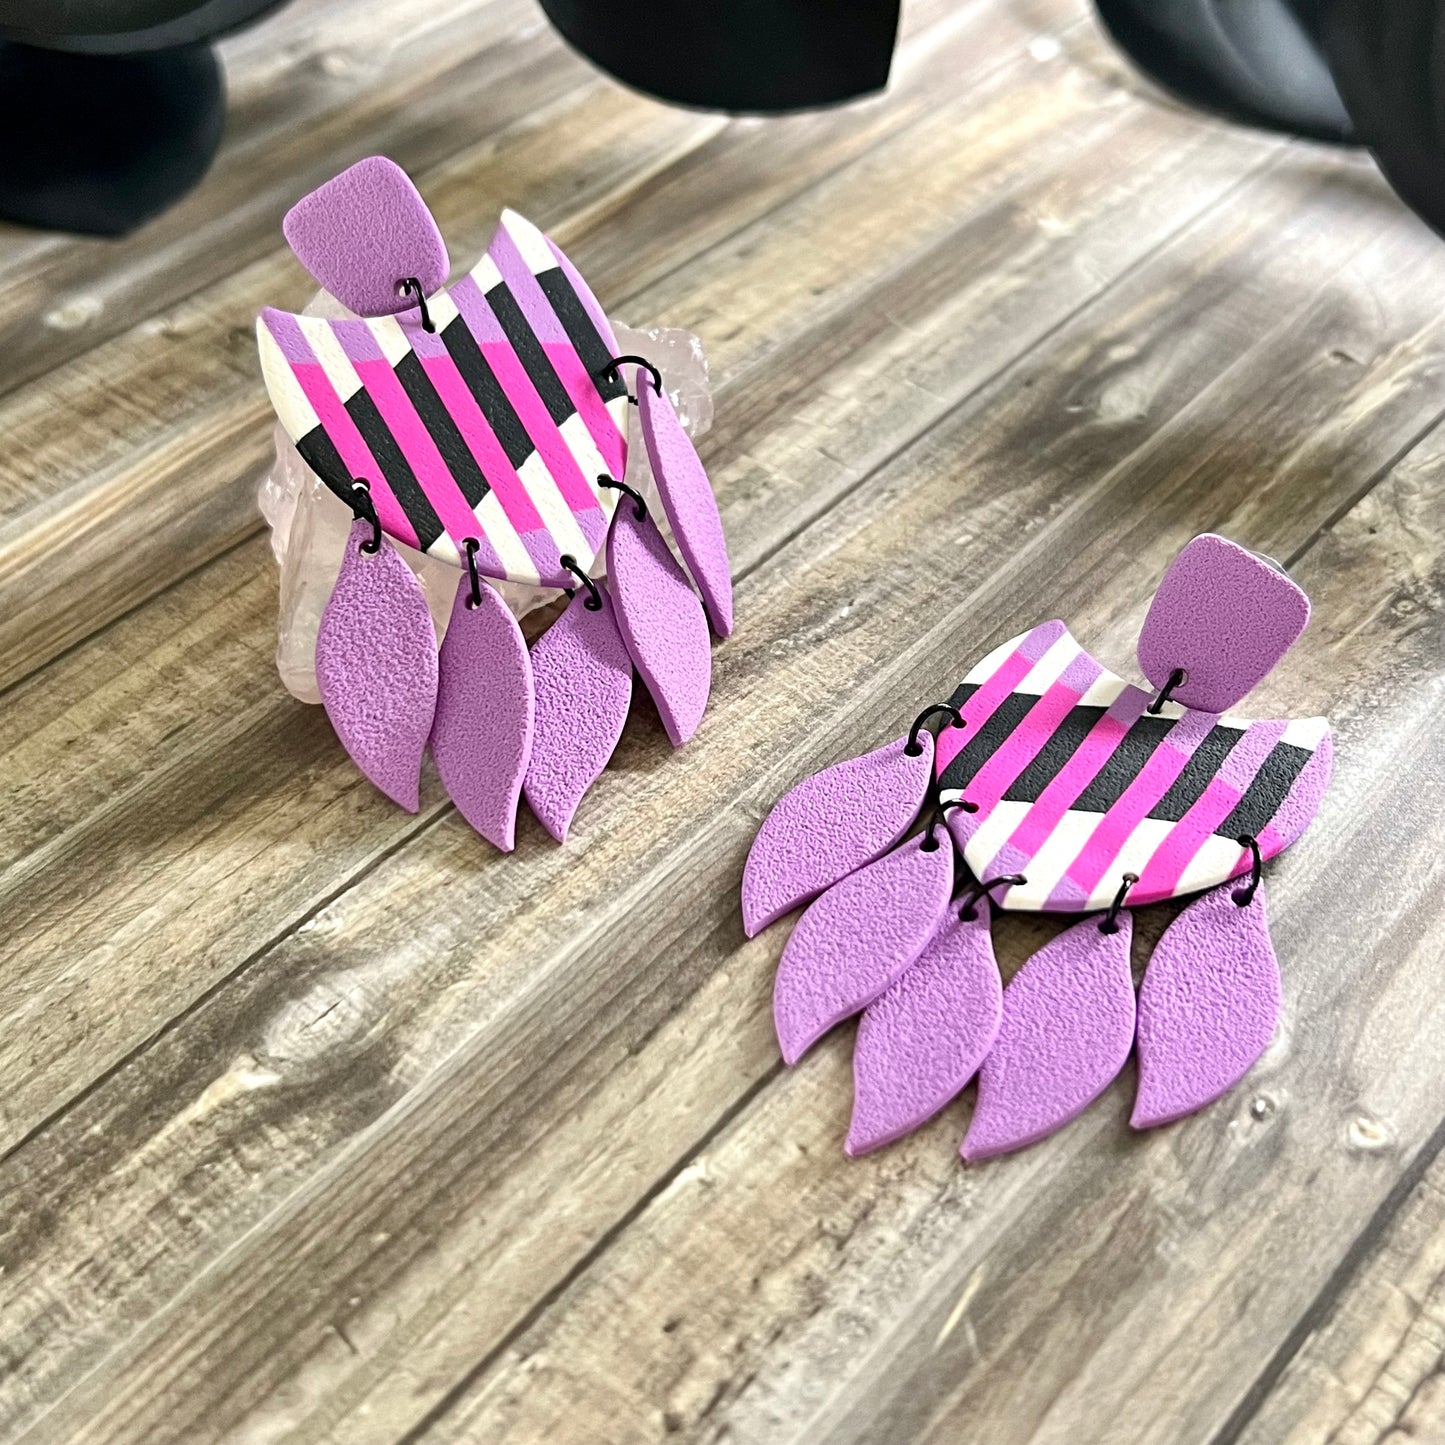 Extra large, dangly purple feathered shields, 90s pink purple black white stripes